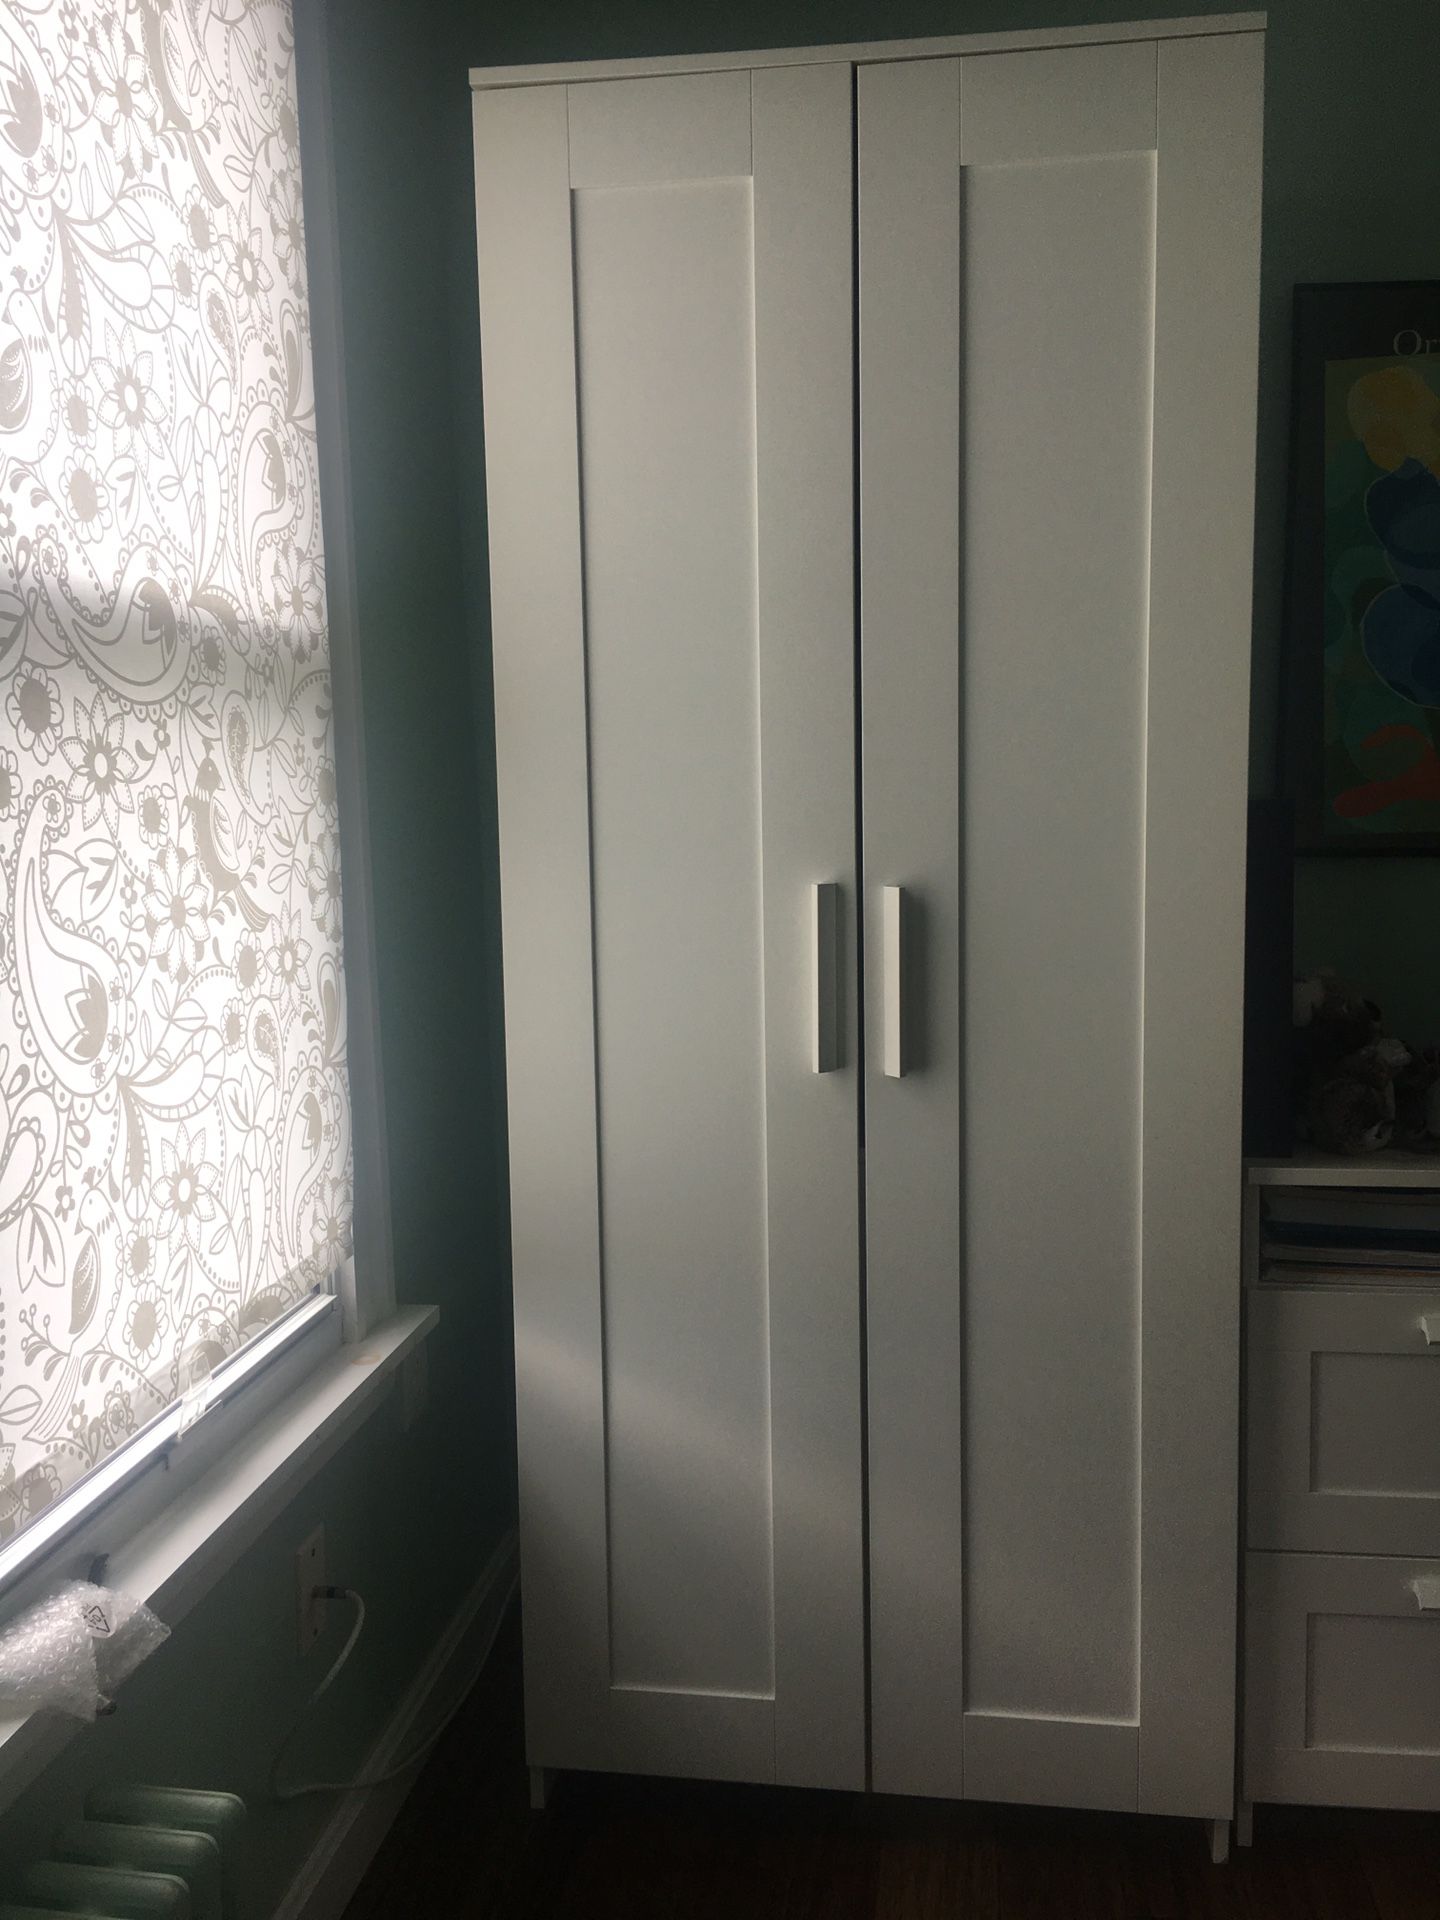 IKEA wardrobe with two shelves